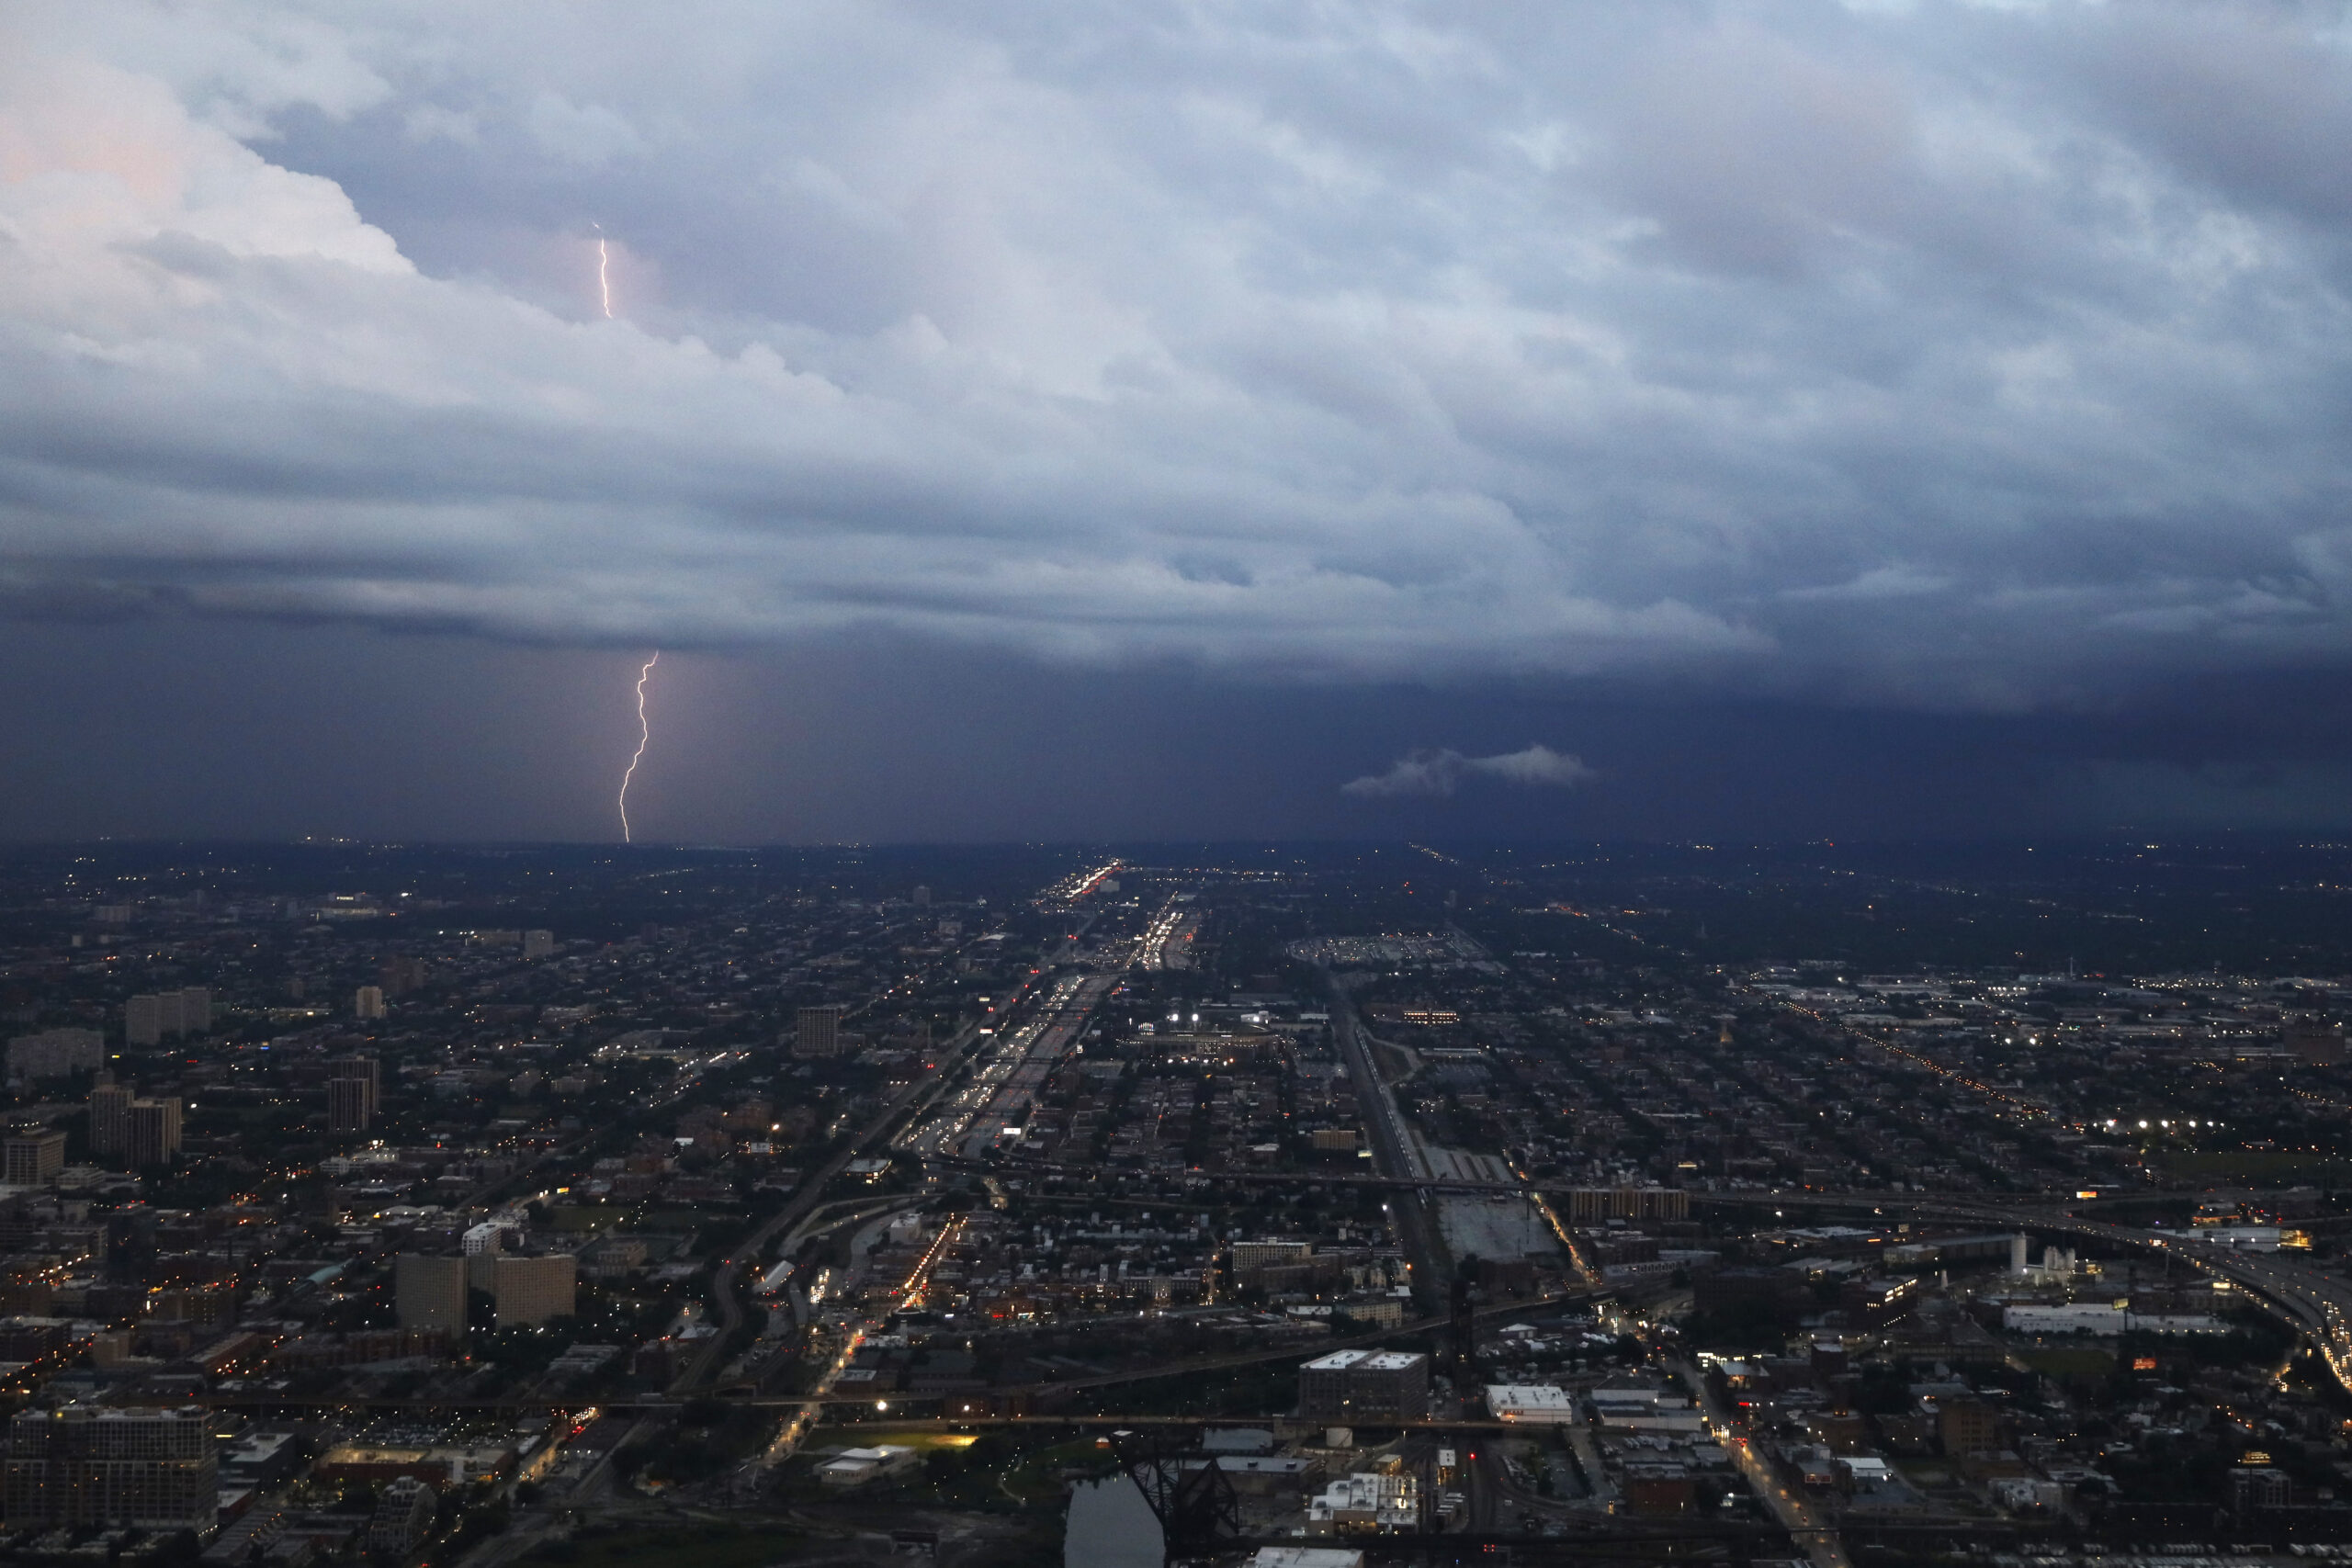 An aerial shot shows a bolt of lightning touching ground in Chicago